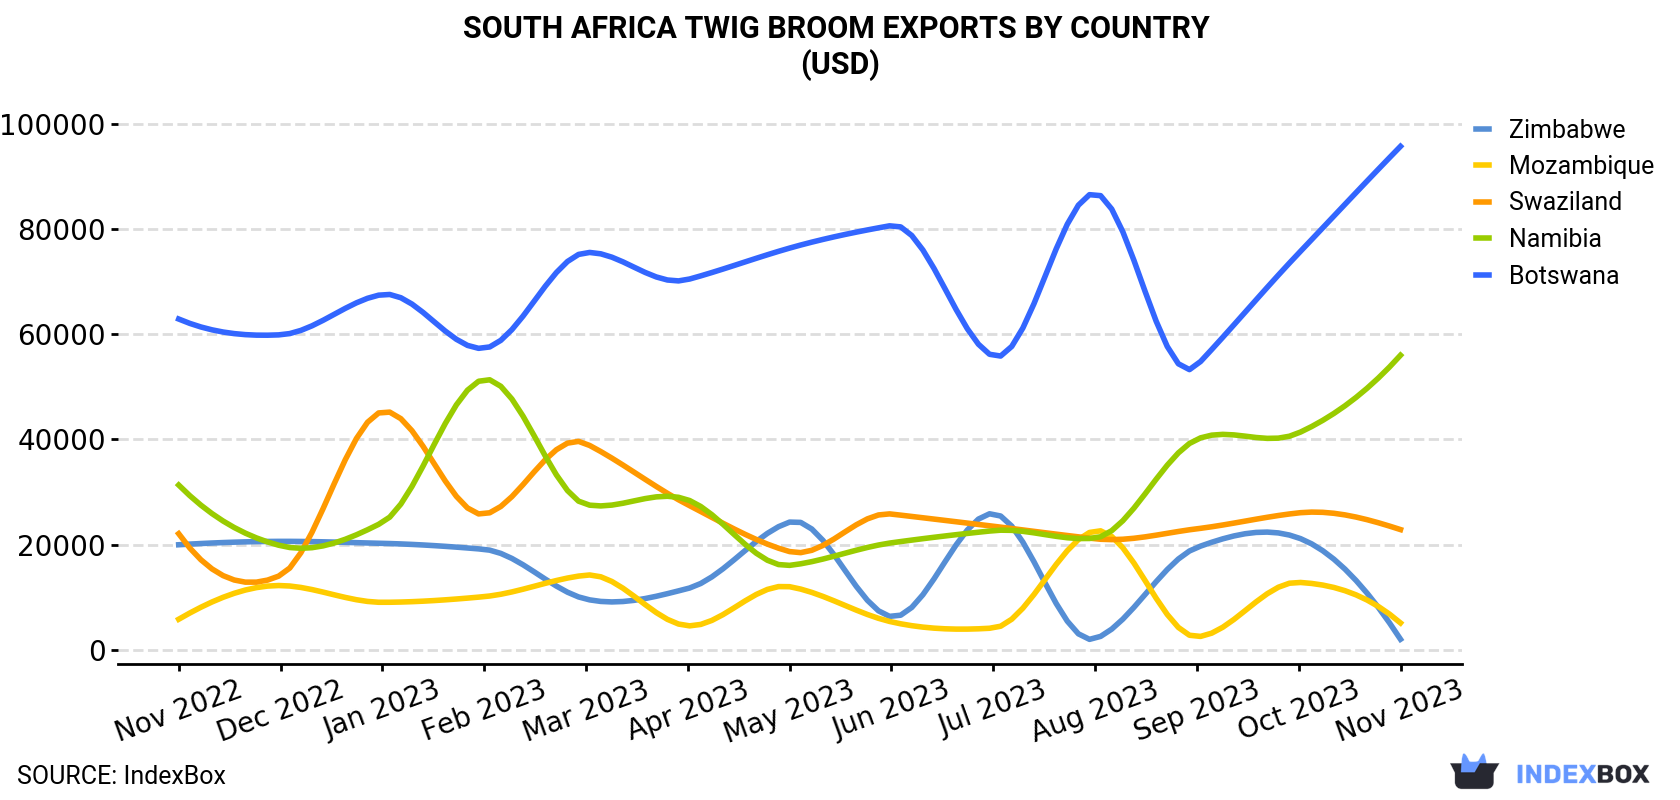 South Africa Twig Broom Exports By Country (USD)